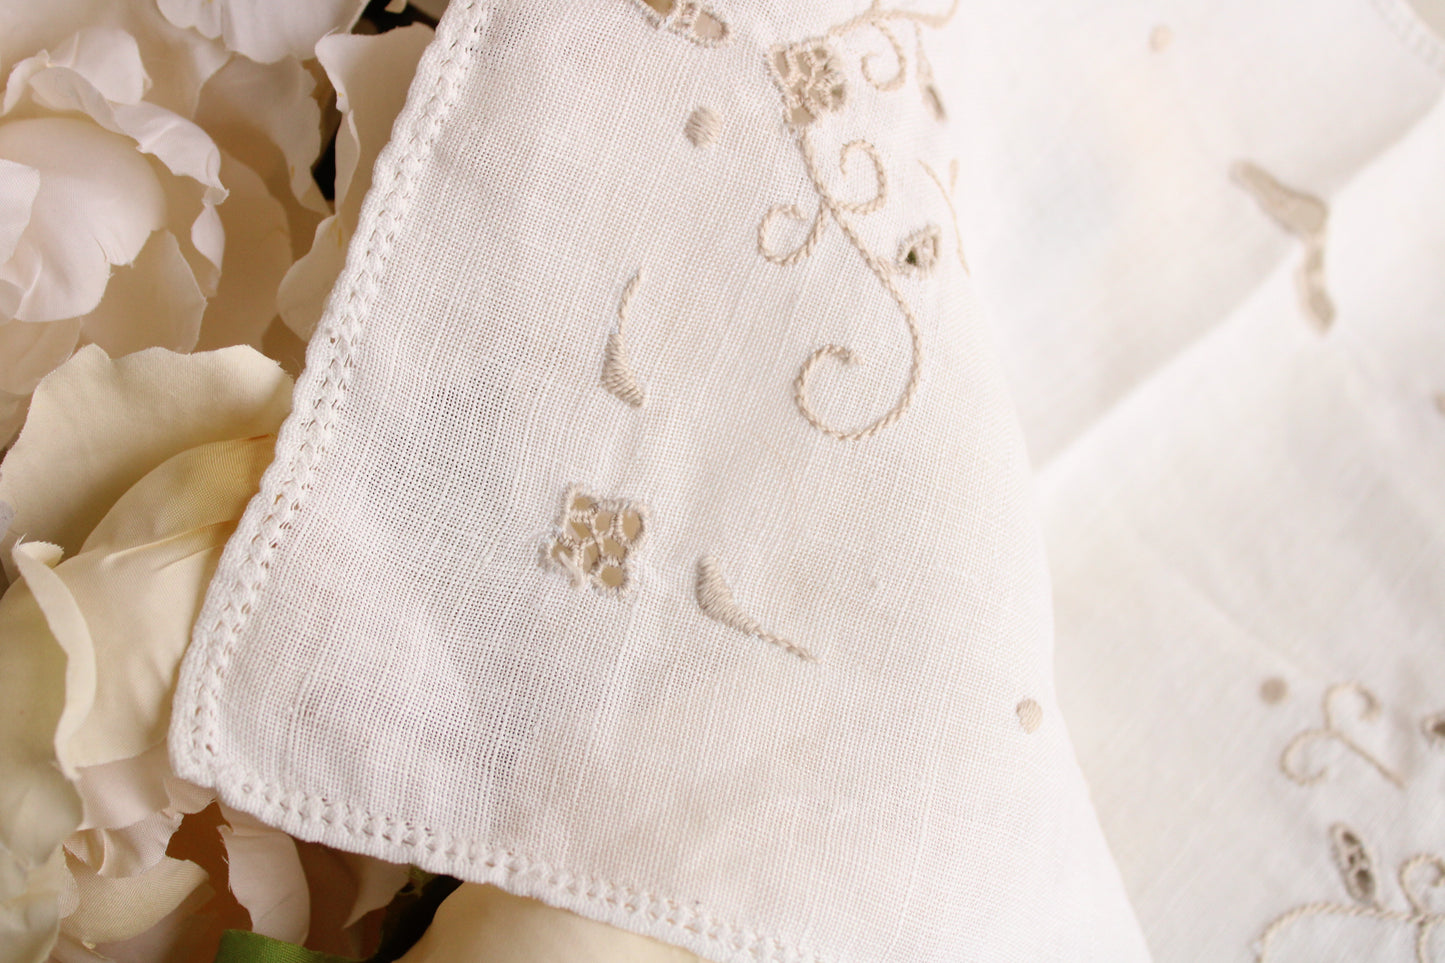 Vintage 1930s White Linen Doily with Brown Embroidery